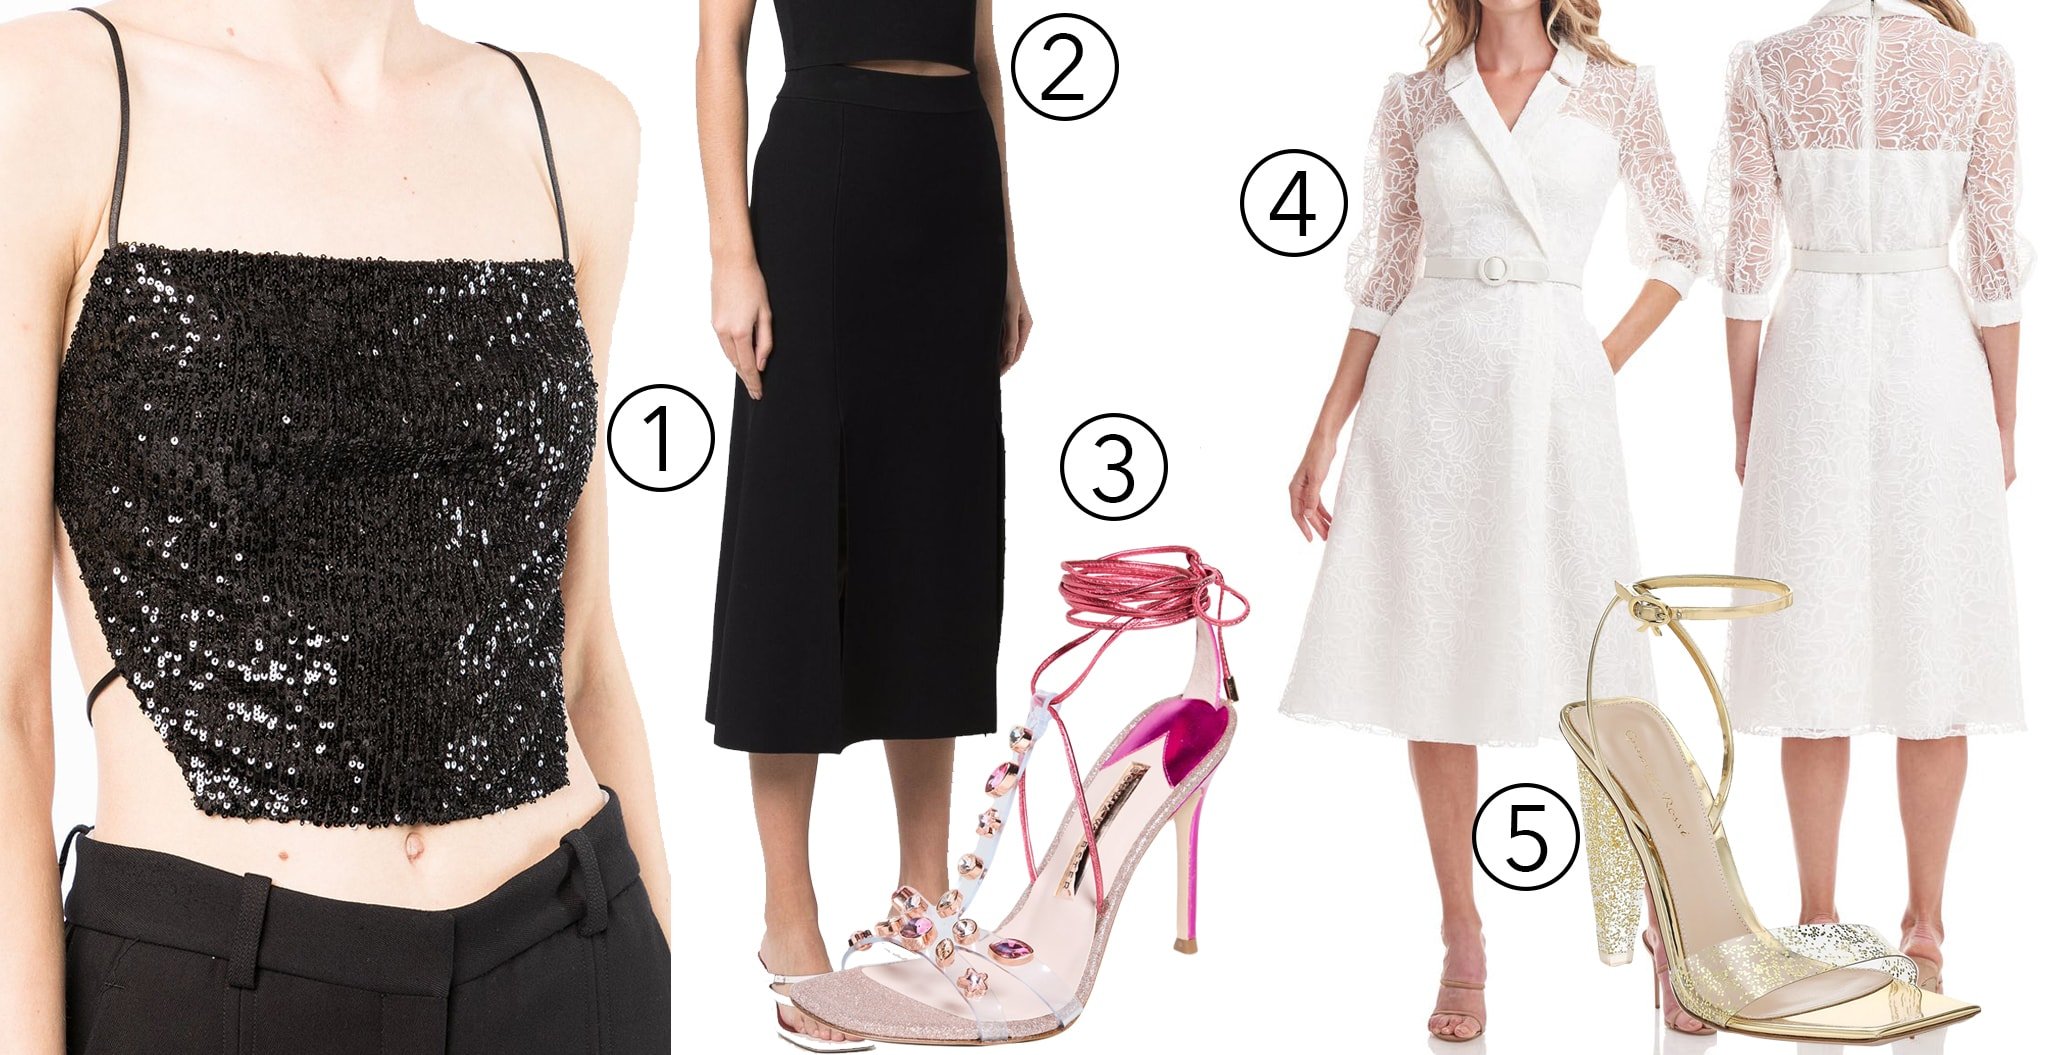 1. In The Mood For Love Glitter Square-Neck Top; 2. Maje Front-Slit Midi Skirt; 3. Sophia Webster Camille Sandals; 4. Kay Unger Khloe Floral Illusion Lace Dress; 5. Gianvito Rossi Glitter Stiletto Sandal